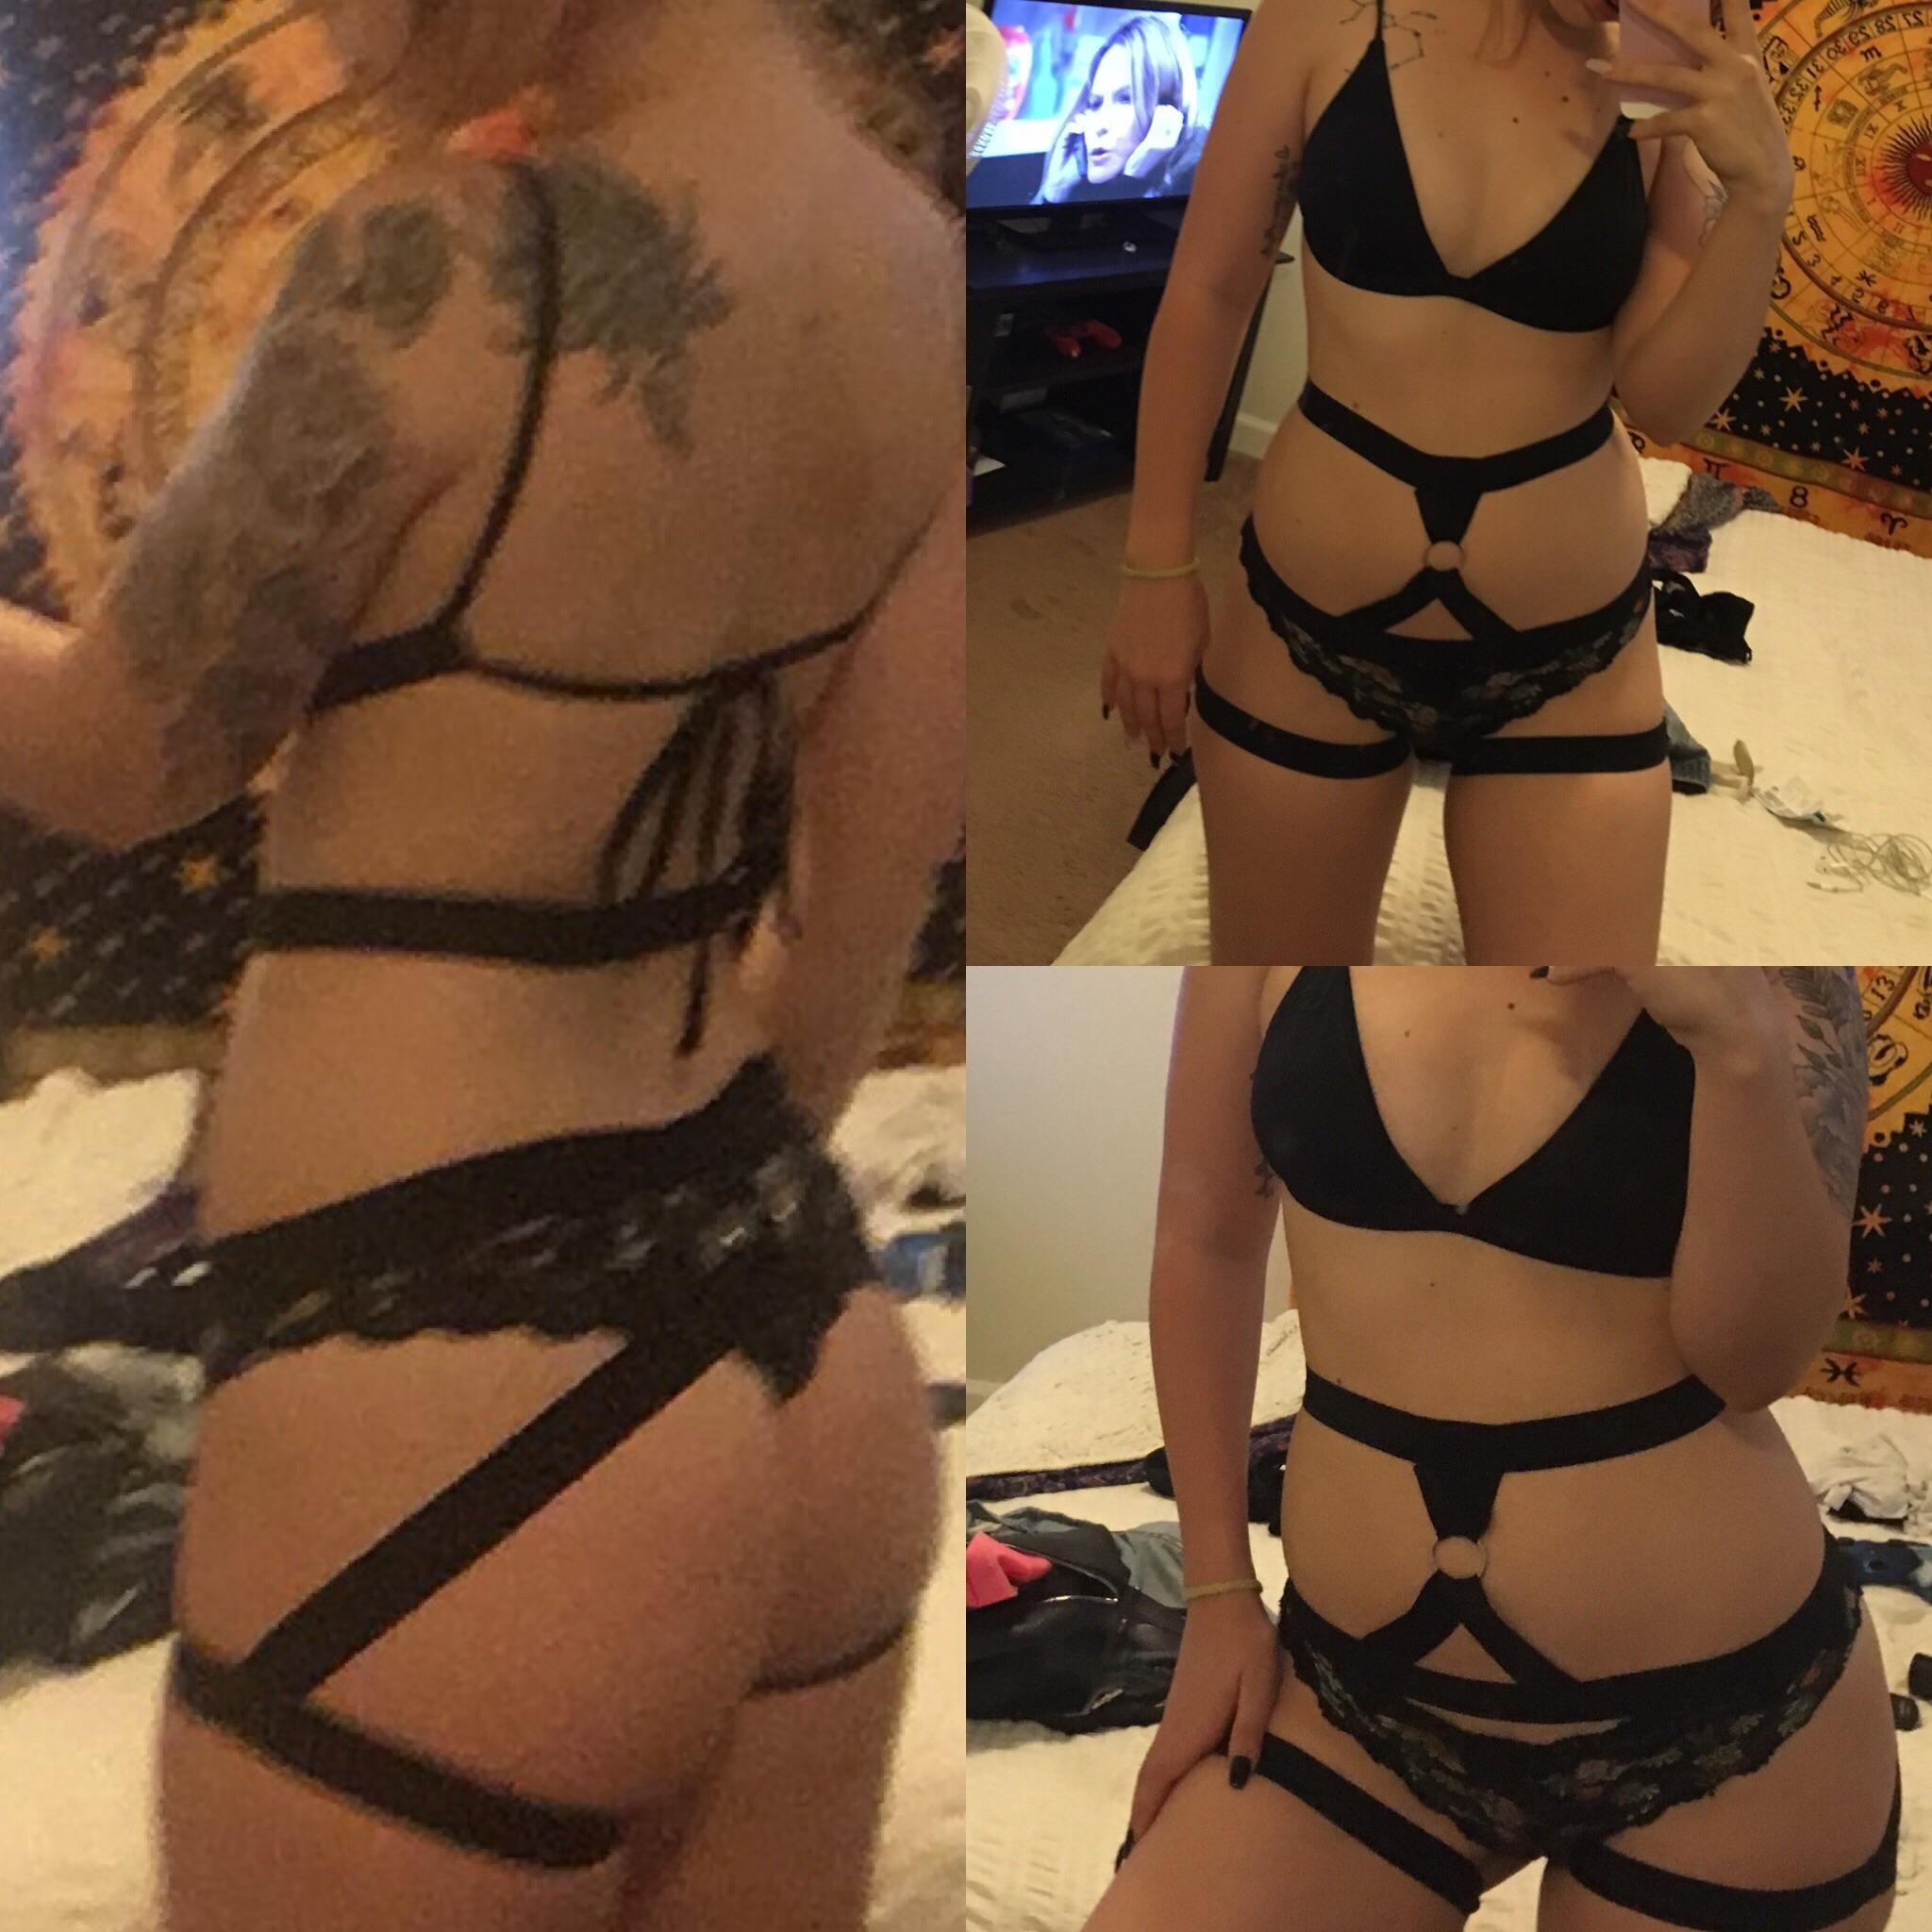 Here's pt 2! Was able to make 2 harnesses with extra supply left over for under ฮ!! Once again here is the tutorial https://youtu.be/HANkQNJiA5U I used as inspo I used other pictures of harnesses as inspo as well and combined designs!